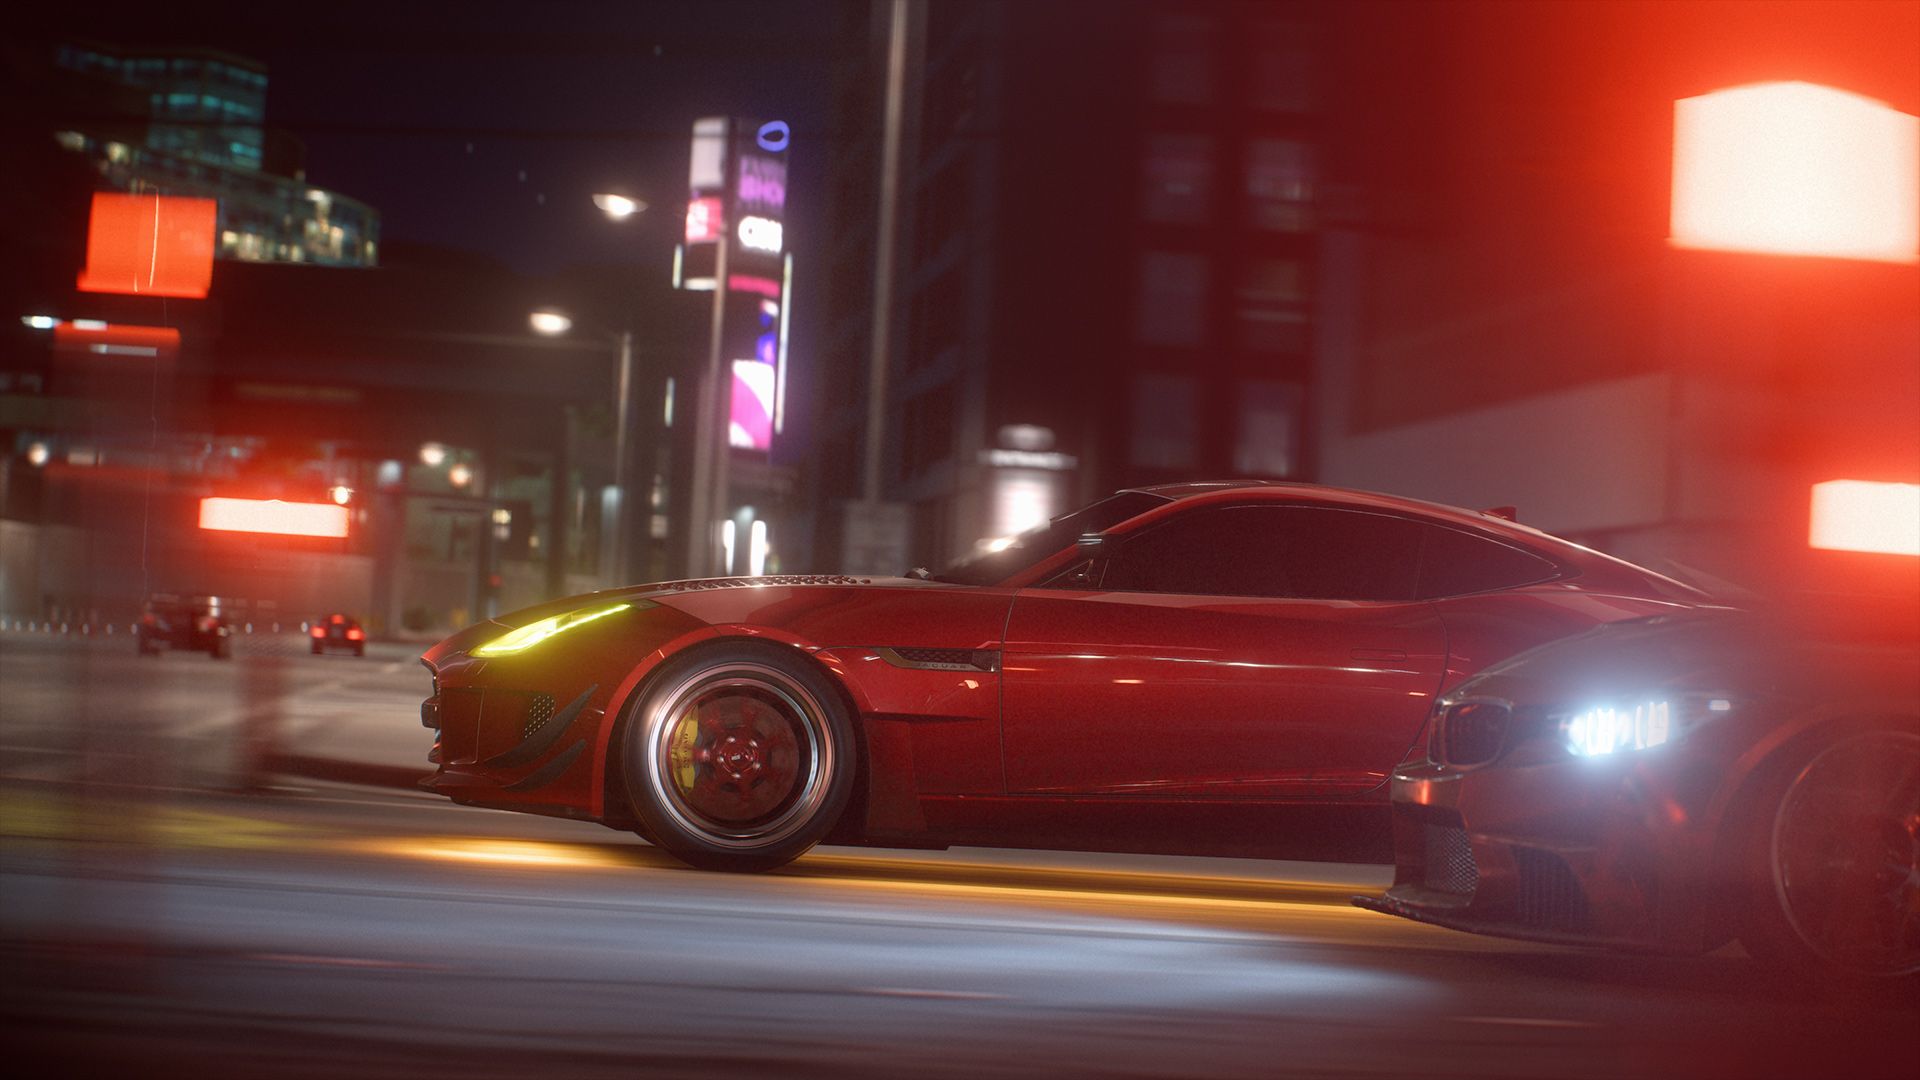 need for speed payback 2 player mode